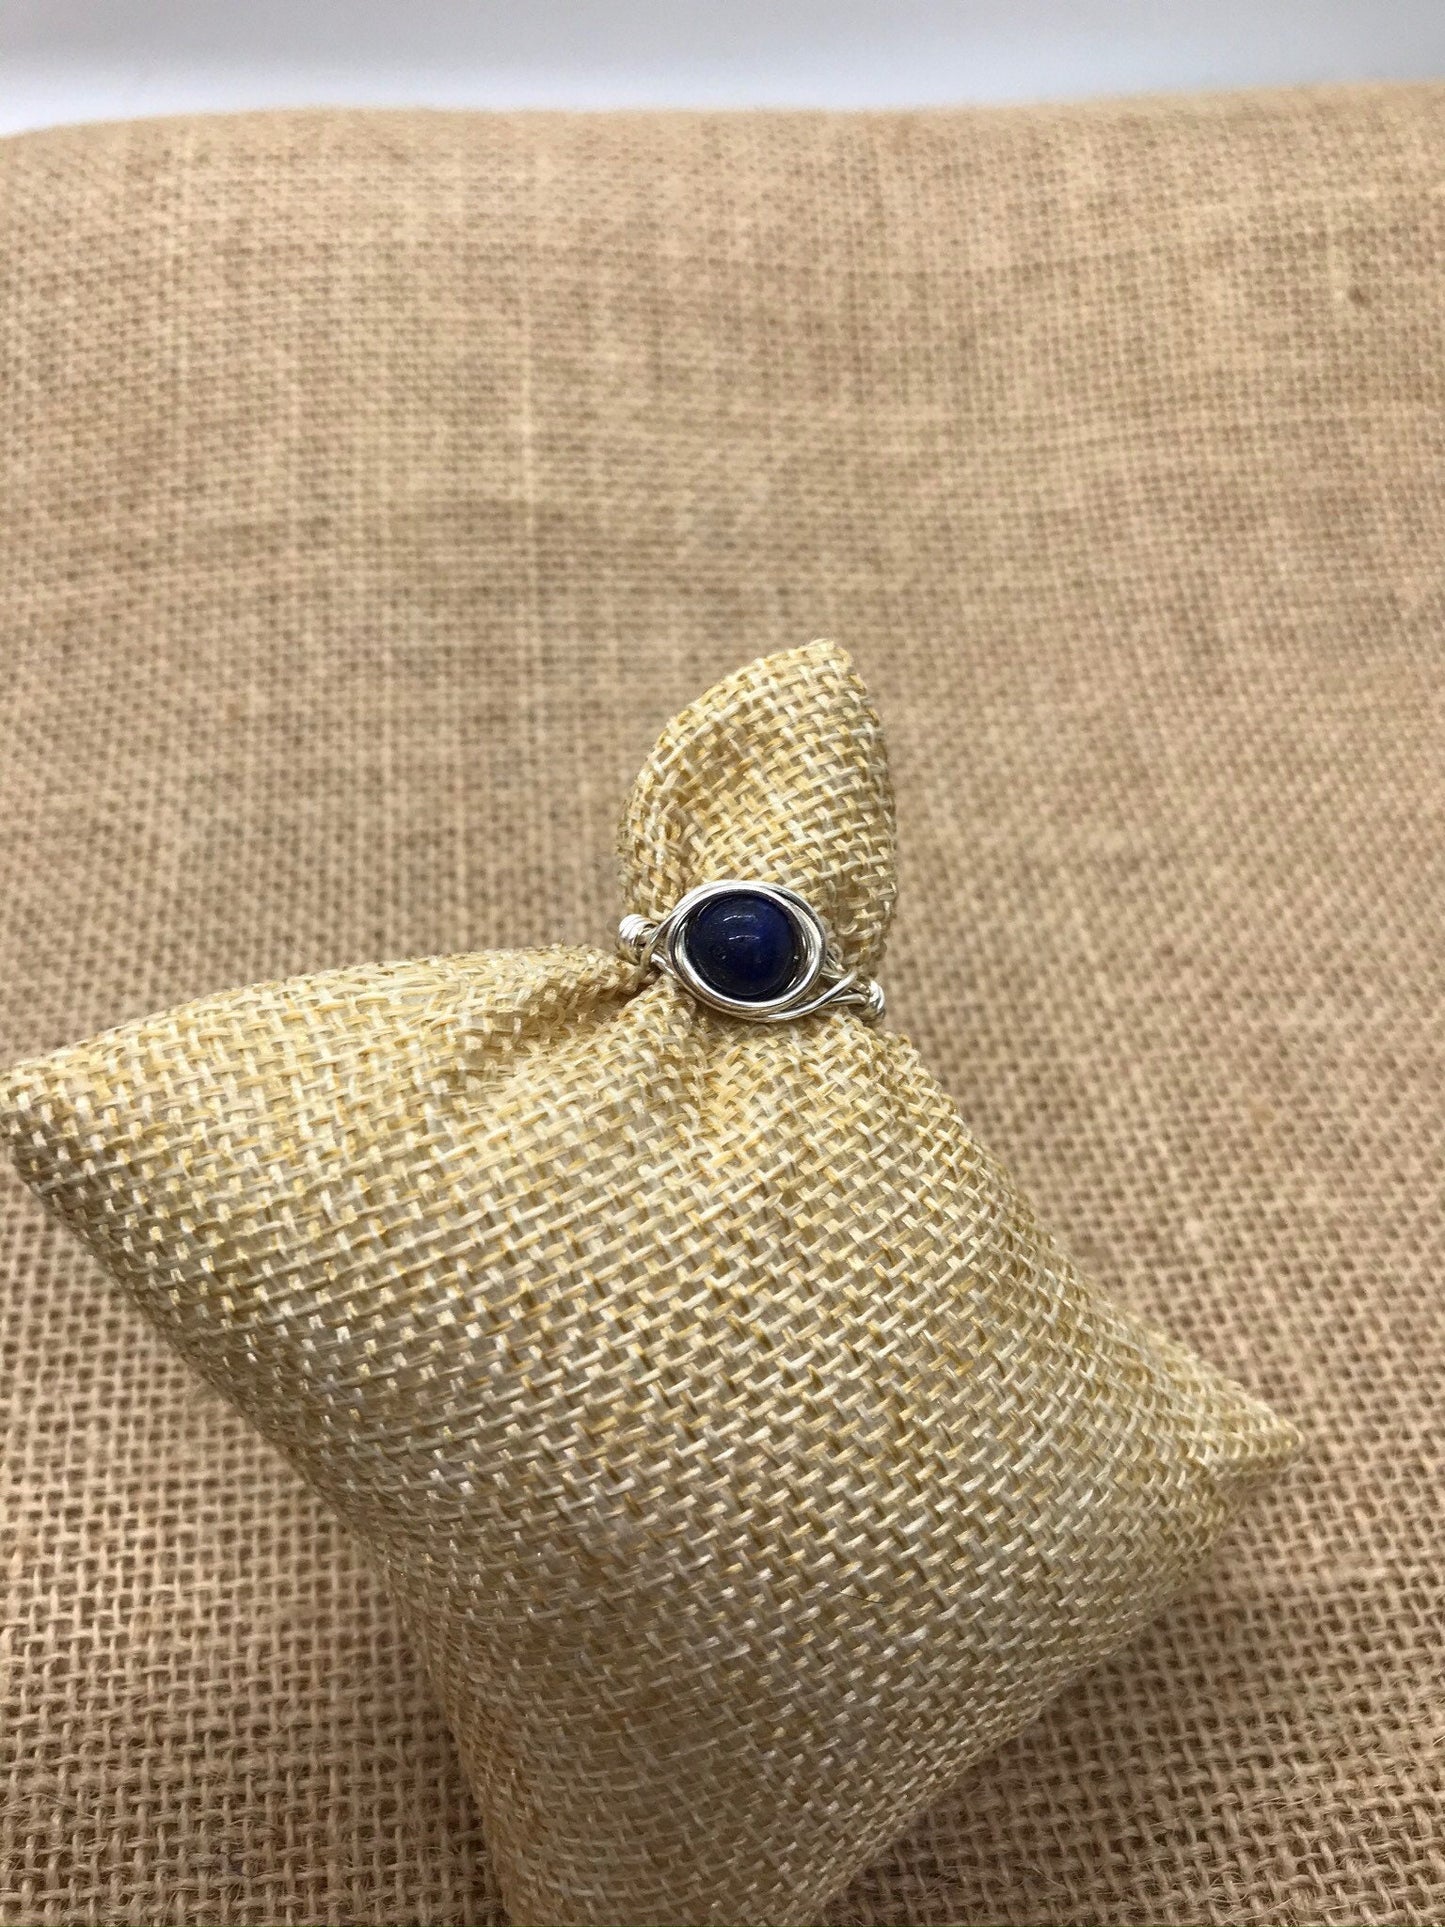 Lapis Lazuli Wire Wrapped Ring